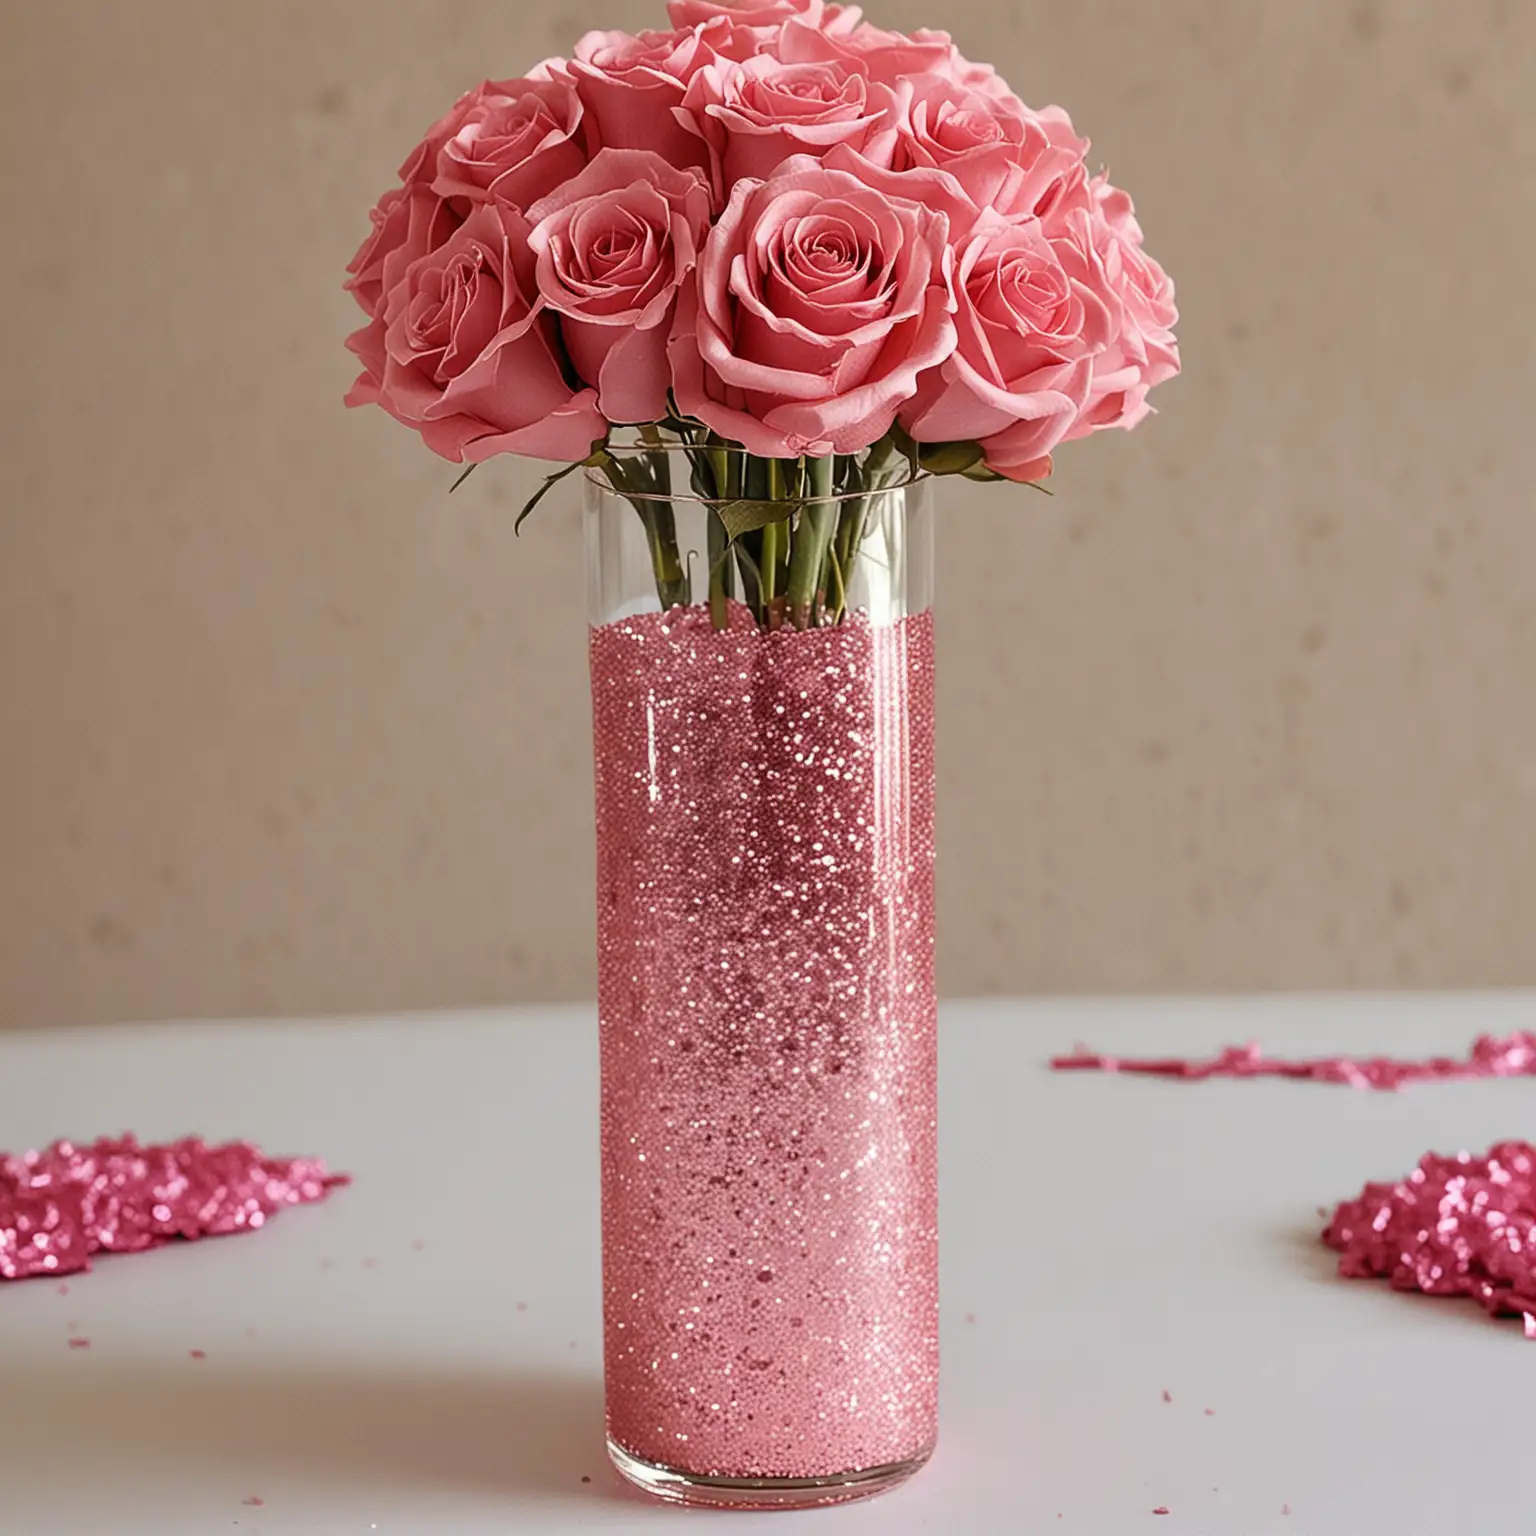 simple cylinder glass vase wedding centerpiece DIY decorated with champage and rose pink colored glitter